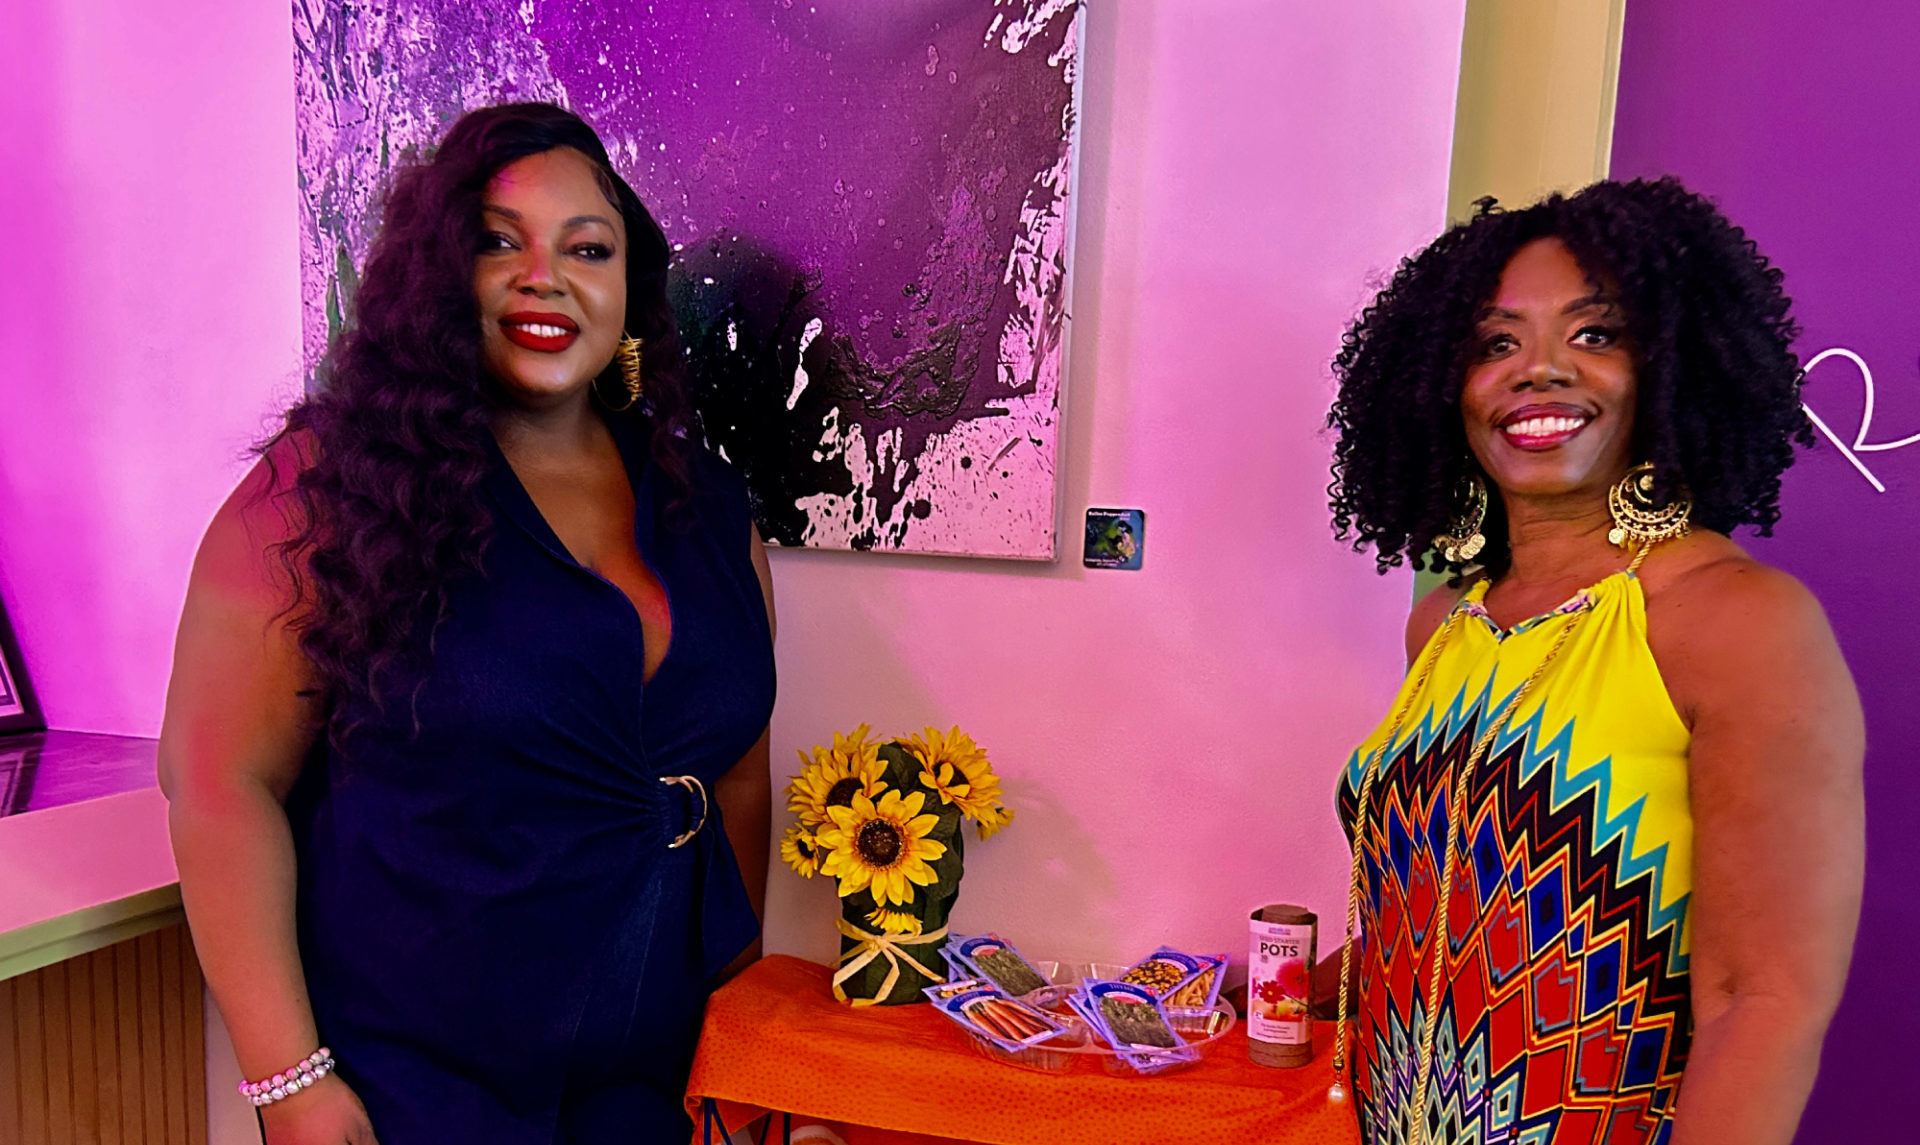 Two Black women stand smiling against a purple and yellow background. Between them is a table with coloring books and crayons and seed packets.